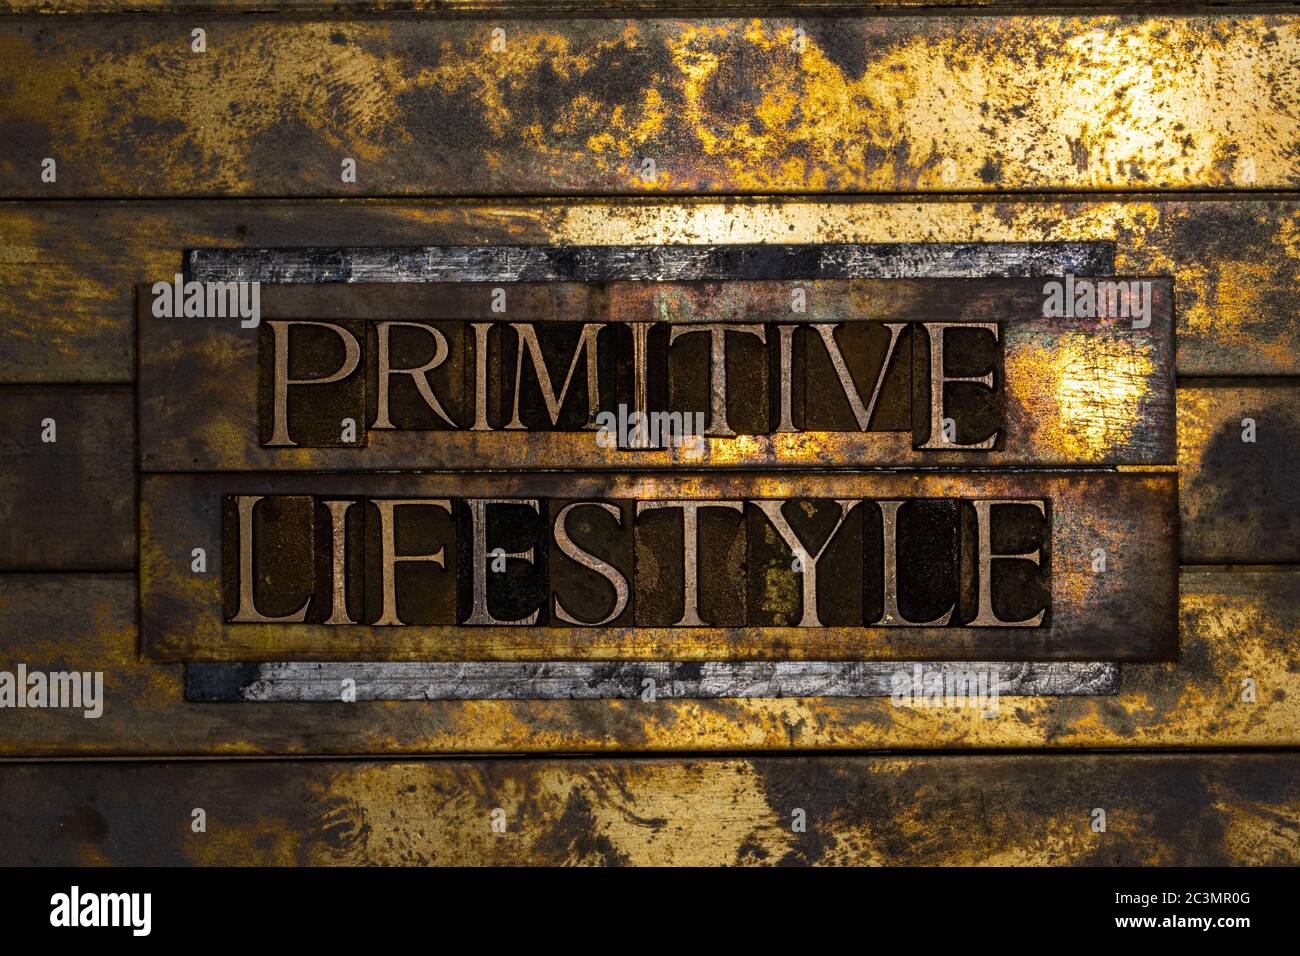 Primitive Lifestyle text formed with real authentic typeset letters on vintage textured silver grunge copper and gold background Stock Photo